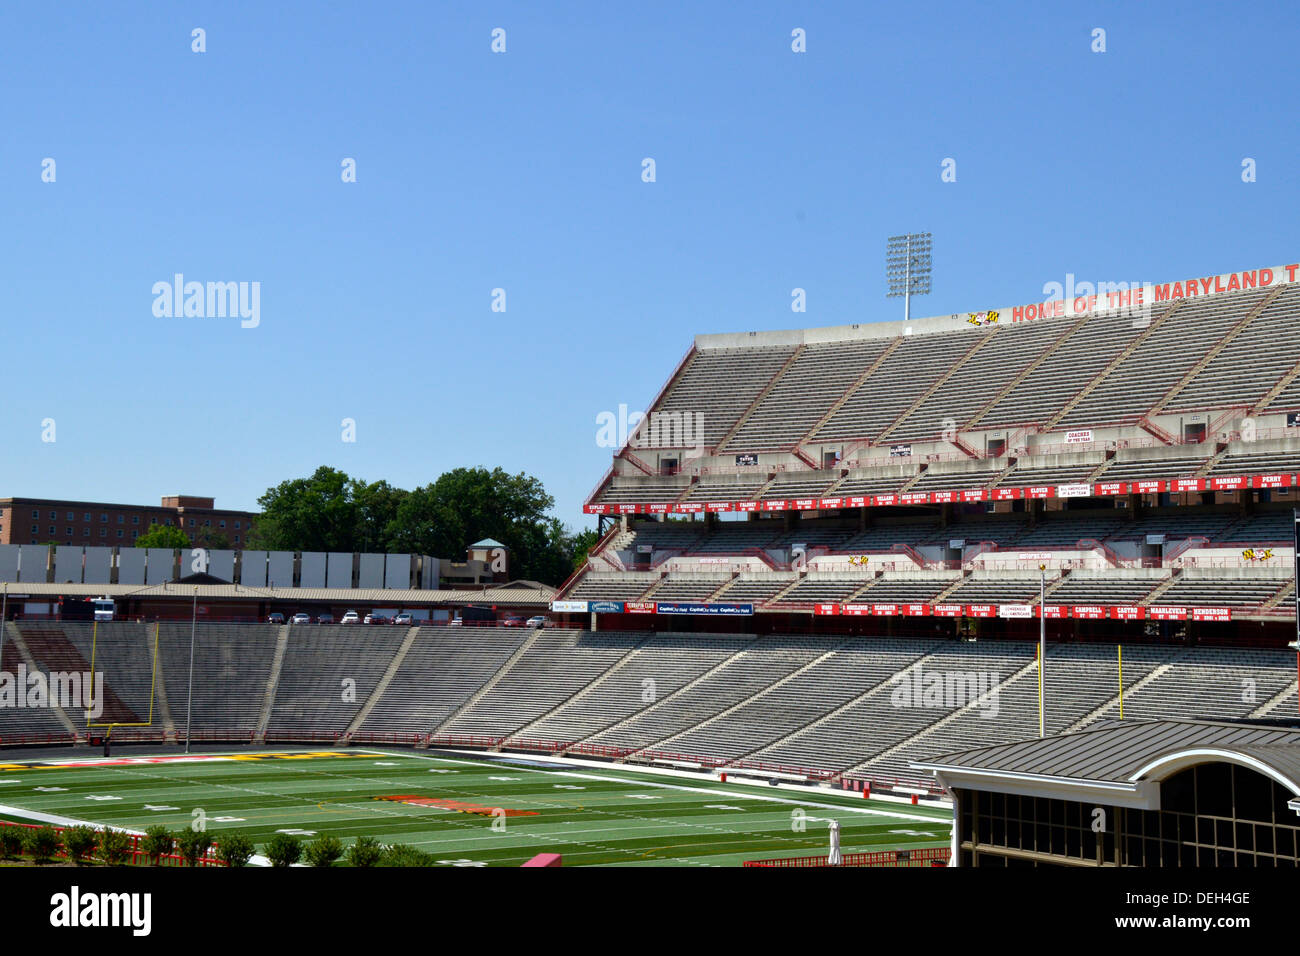 Capital One Field at the University of Maryland Stock Photo